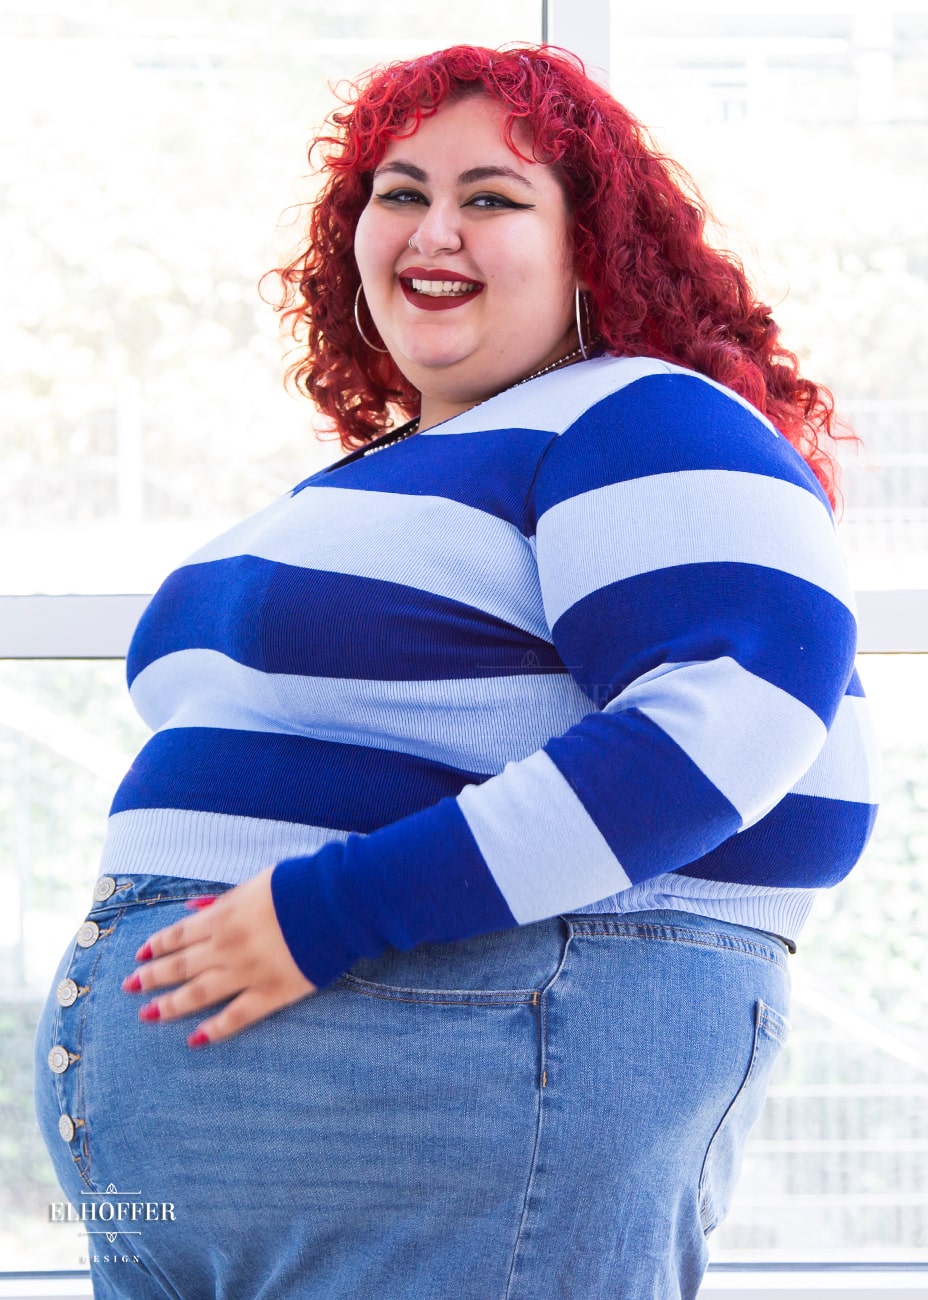 Victoria, an olive skinned size 4XL model with bright red curly hair, is wearing a cropped v-neck sweater with fitted full length sleeves in horizontal thick stripes of bright blue and light blue.